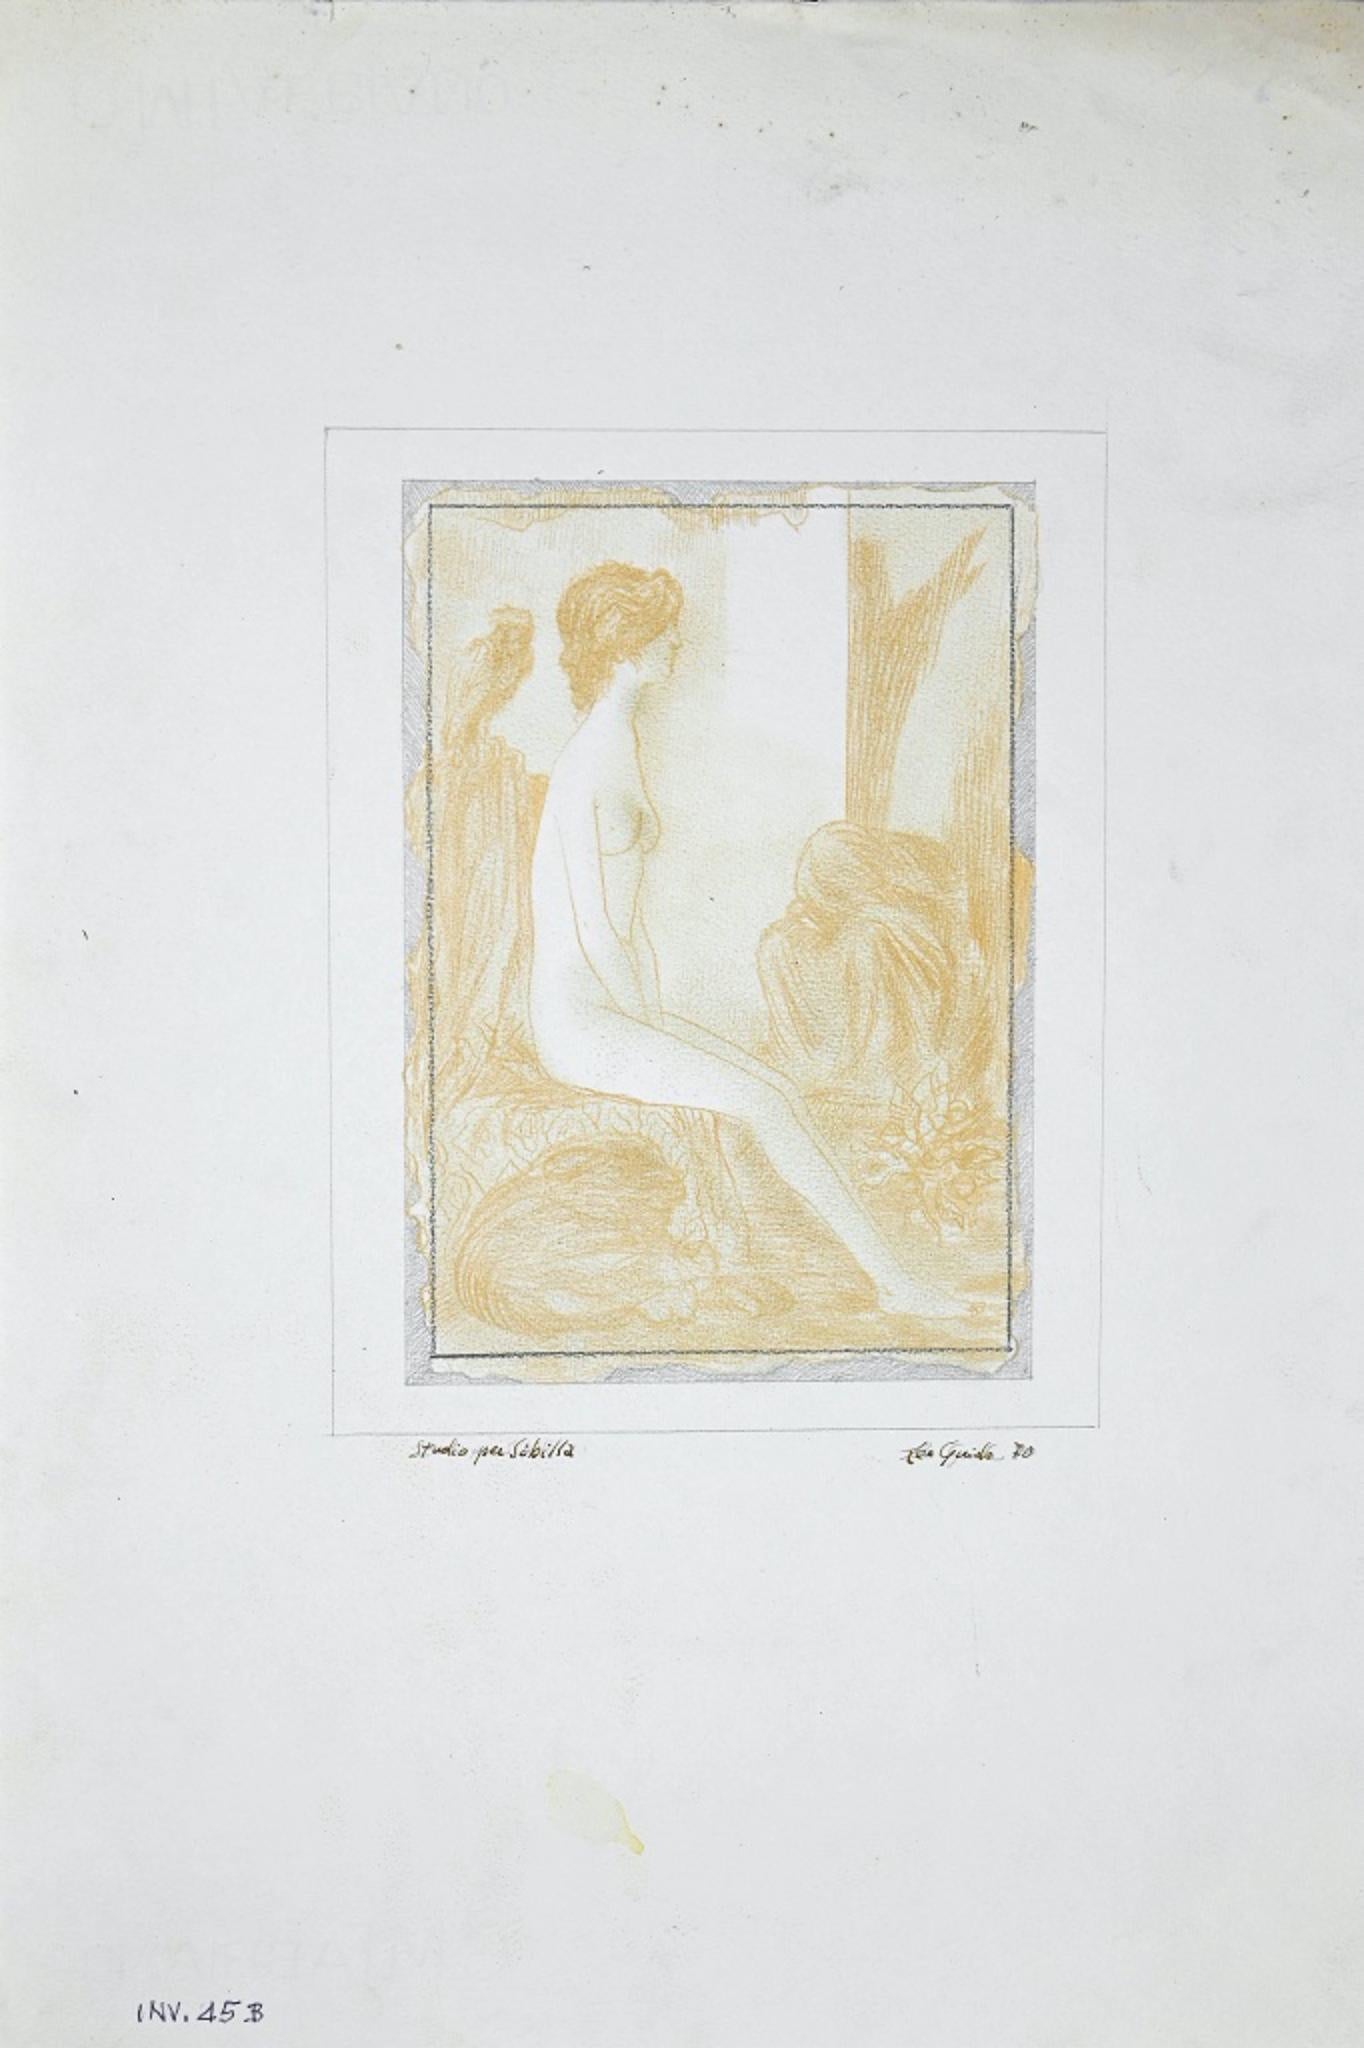 Study for a Sibyl is an original Contemporary artwork realized in 1970 by the italian artist Leo Guida.

Original Yellow and Orange Drawing on cardboard.  Image Dimensions: 31 x 0.1 x 15 cm.

Dated and Hand-signed in ink on the lower right margin by